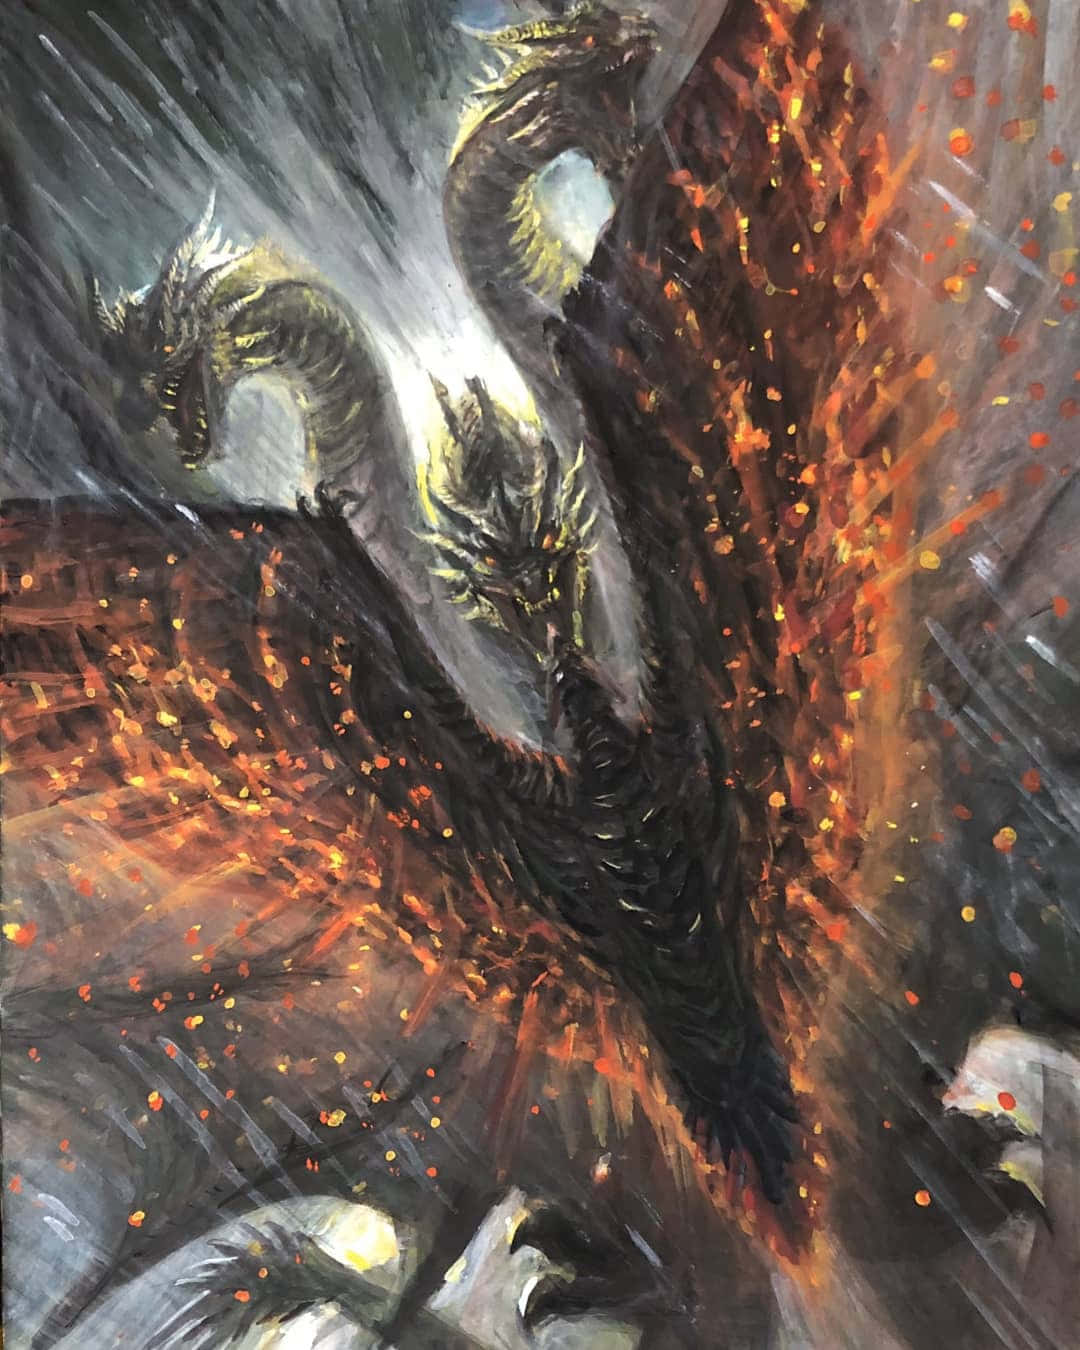 Rodan - The Iconic Creature From The 1956 Classic Movie Wallpaper